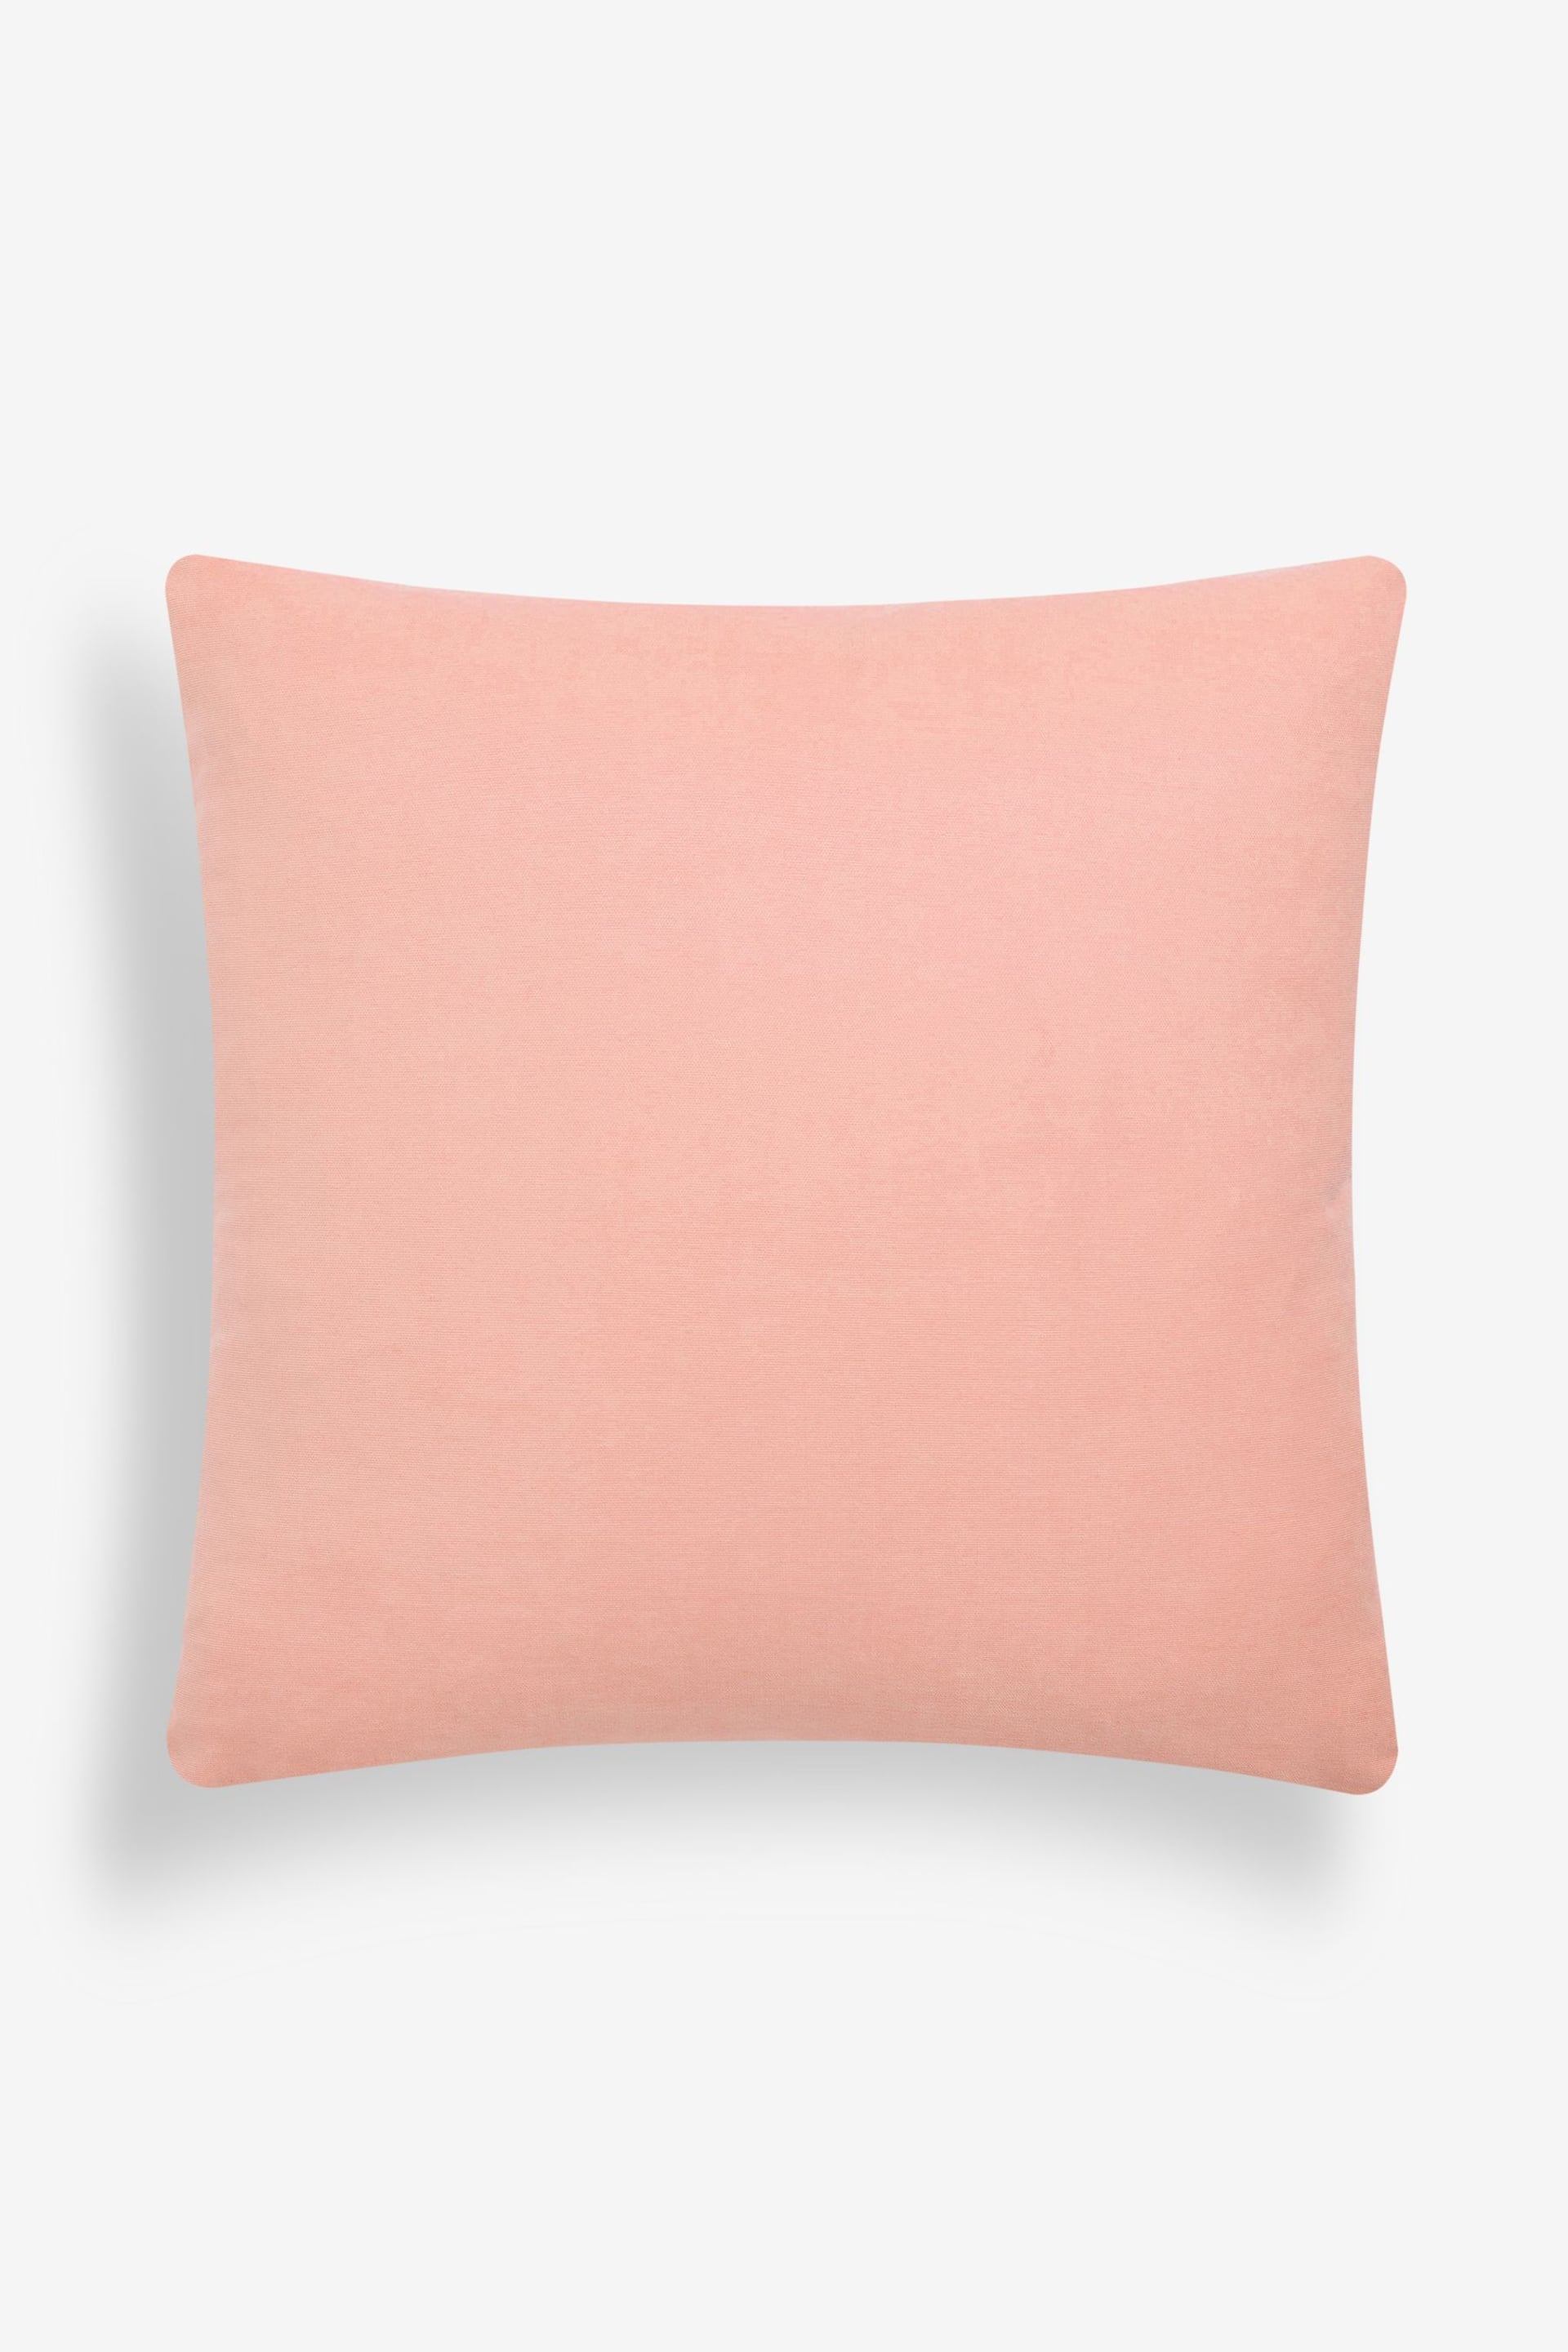 Pink Bright Spring Floral 50 x 50cm Cushion - Image 3 of 5